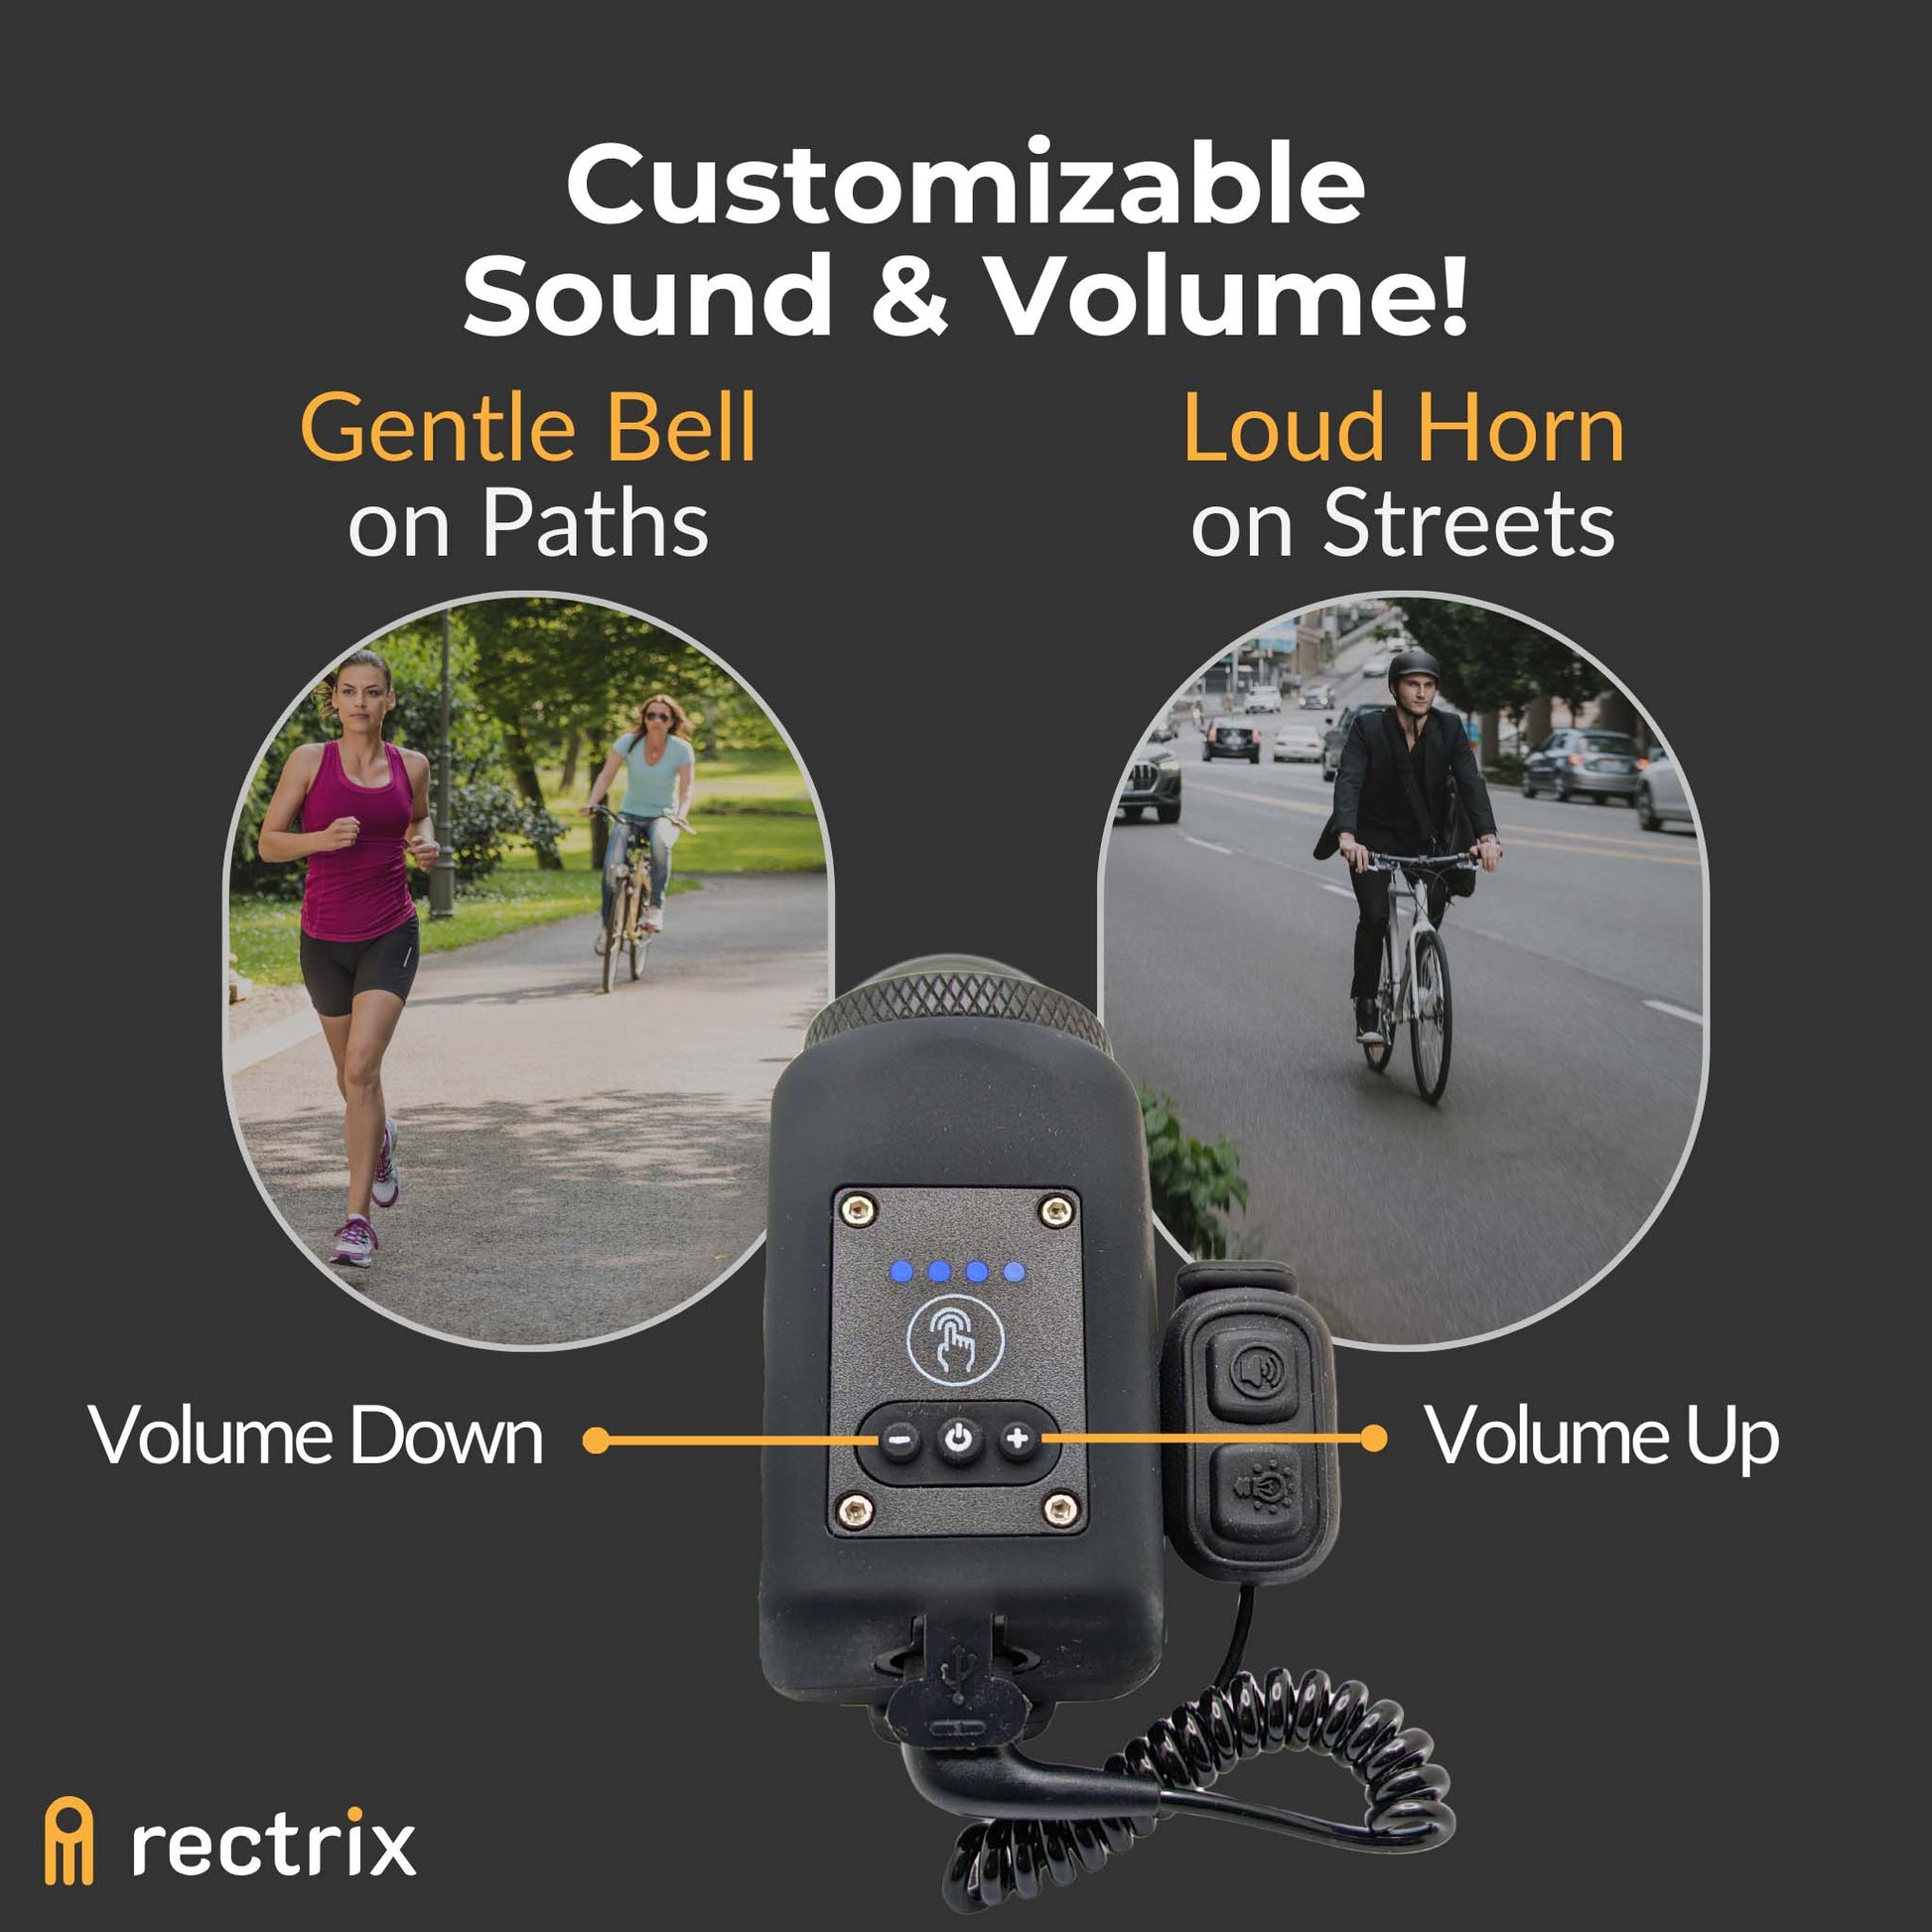 Showcasing the horn's adjustable volume for use on quiet bike paths or bustling streets